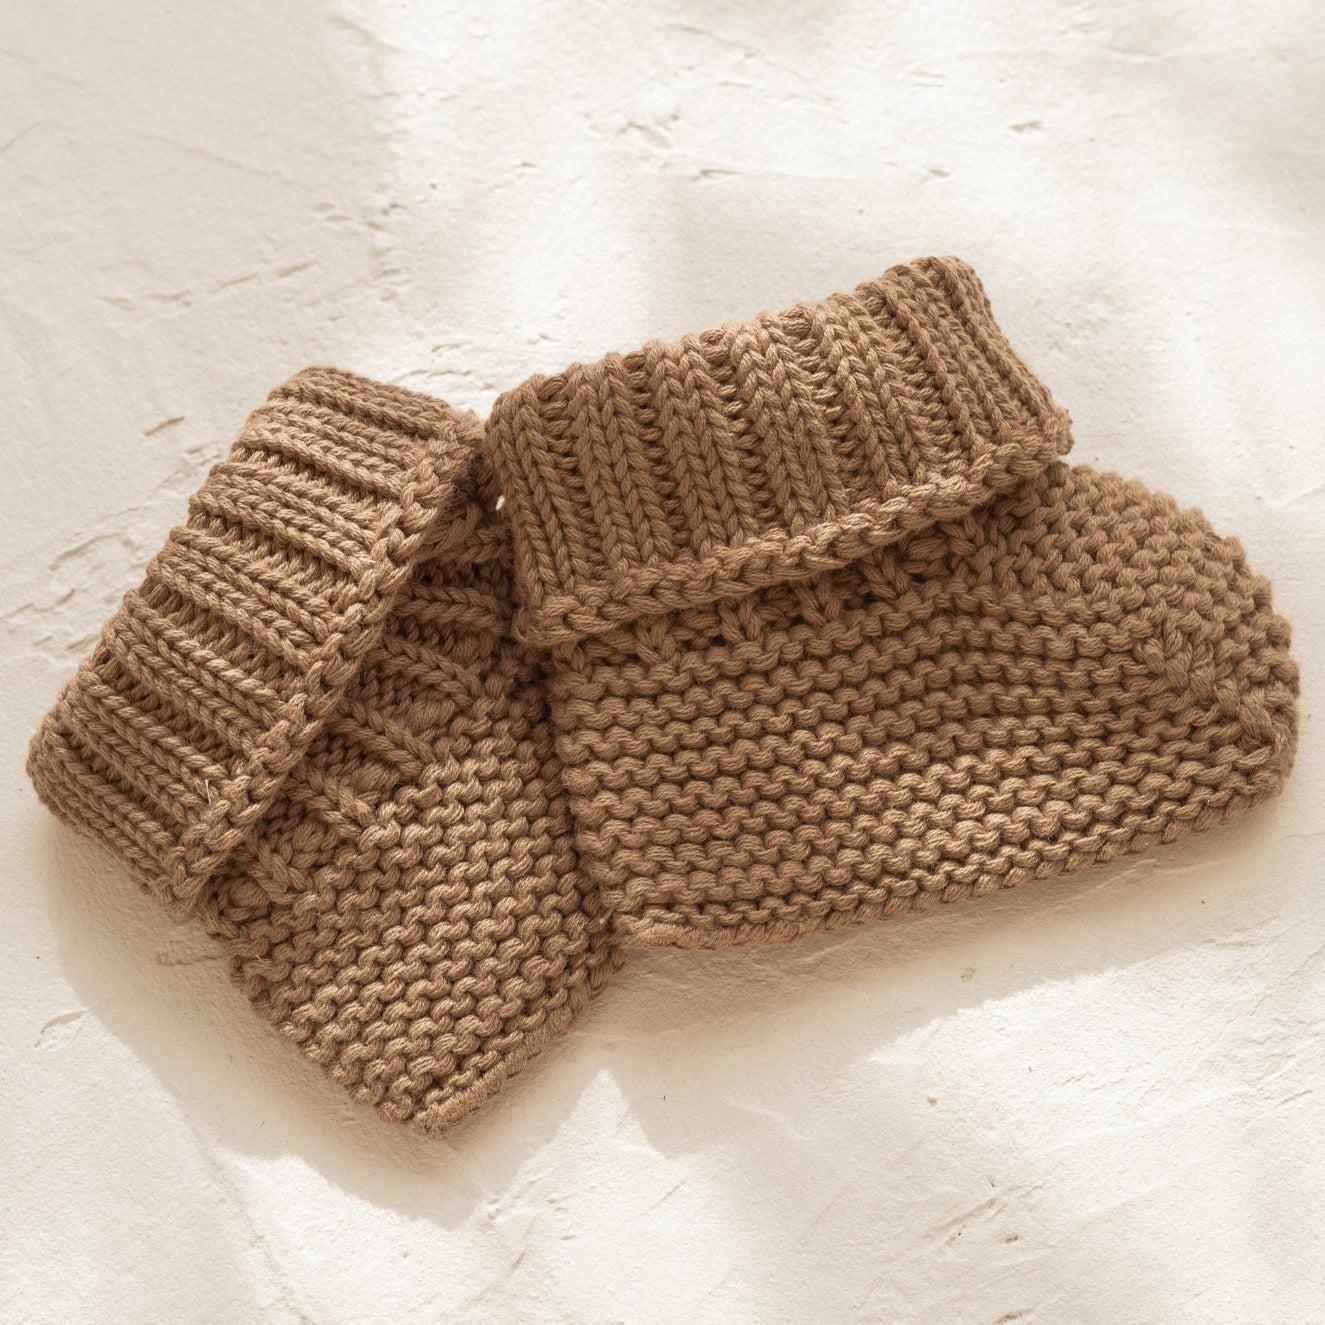 A pair of Illoura baby booties in chocolate made from organic cotton on a white surface.